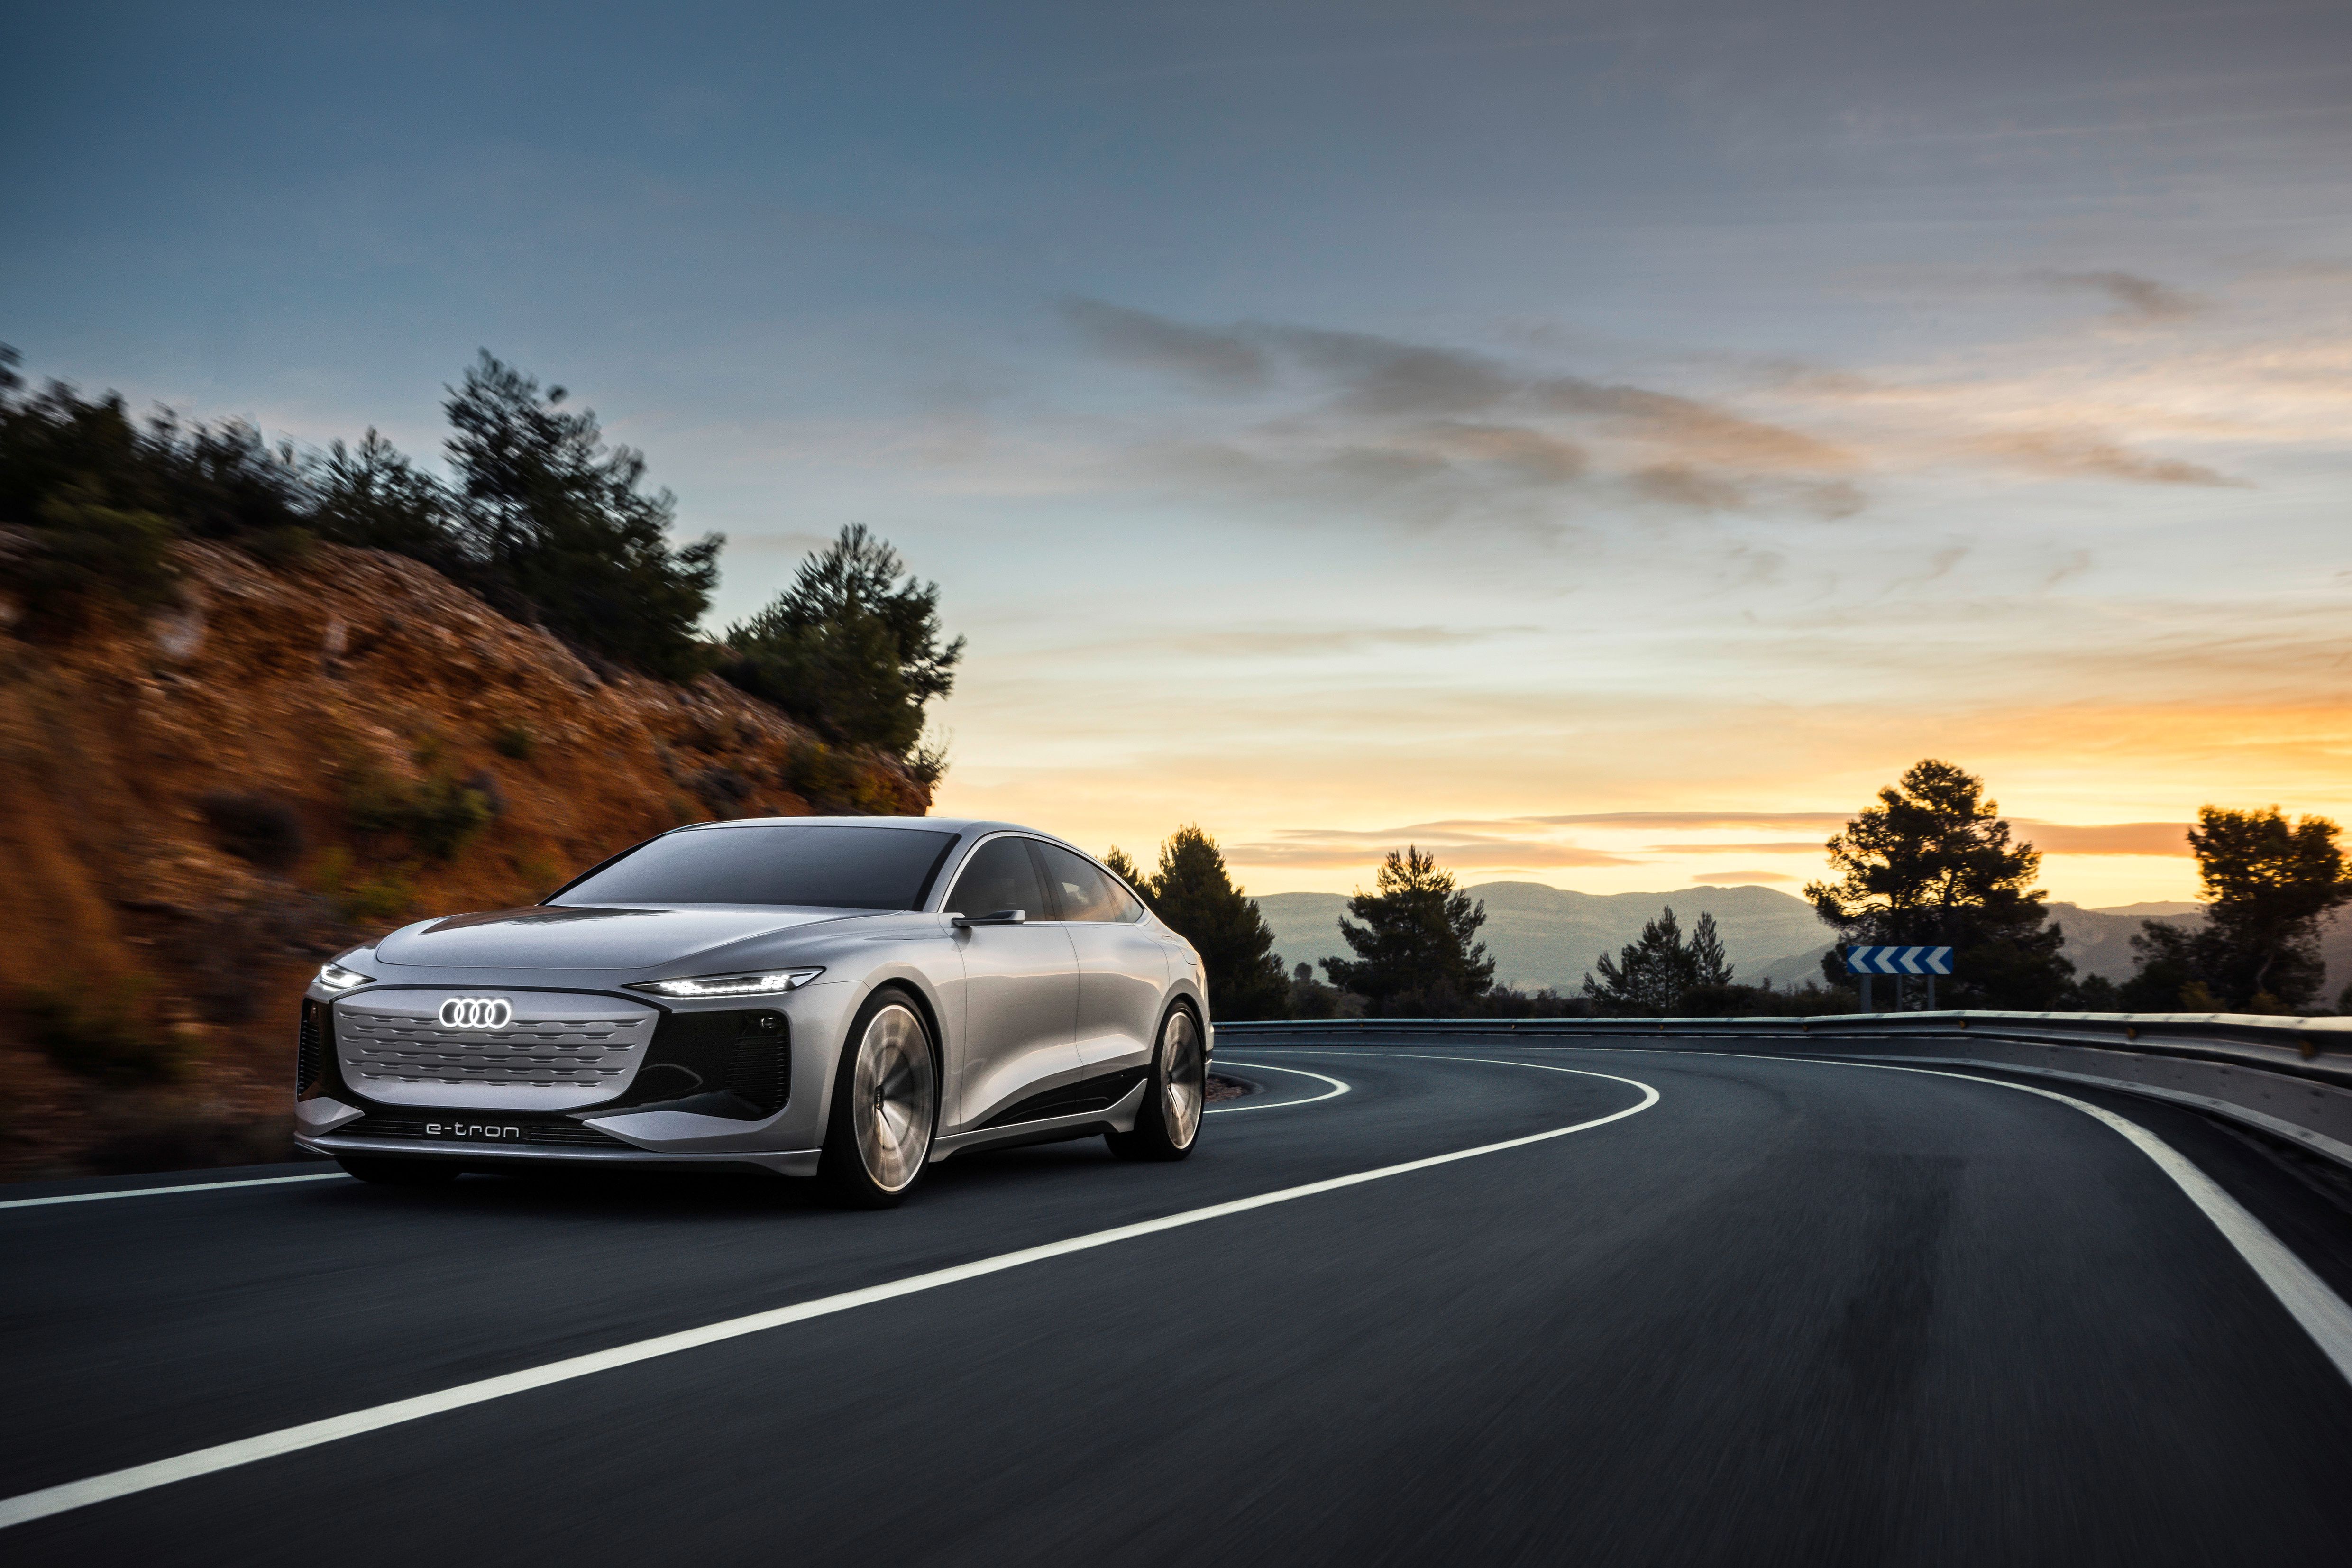 2021 Audi Might Have a Big Surprise At the 2022 Geneva Motor Show